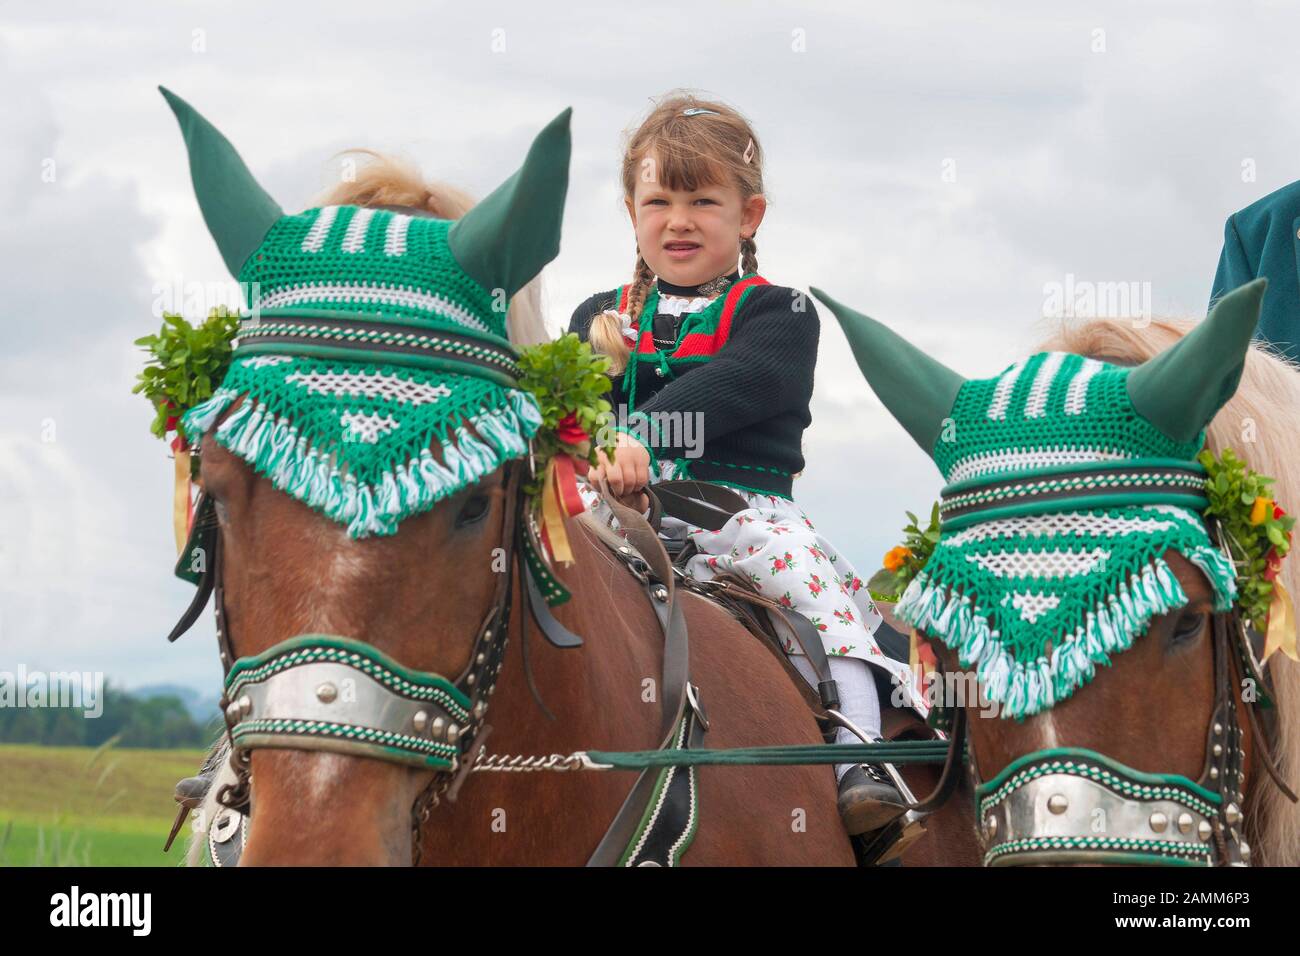 the traditional Leonhardiritt in Holzhausen - Teisendorf, Upper Bavaria, the ride is first mentioned in a document in 1612, the beautifully dressed horses are blessed, Germany [automated translation] Stock Photo